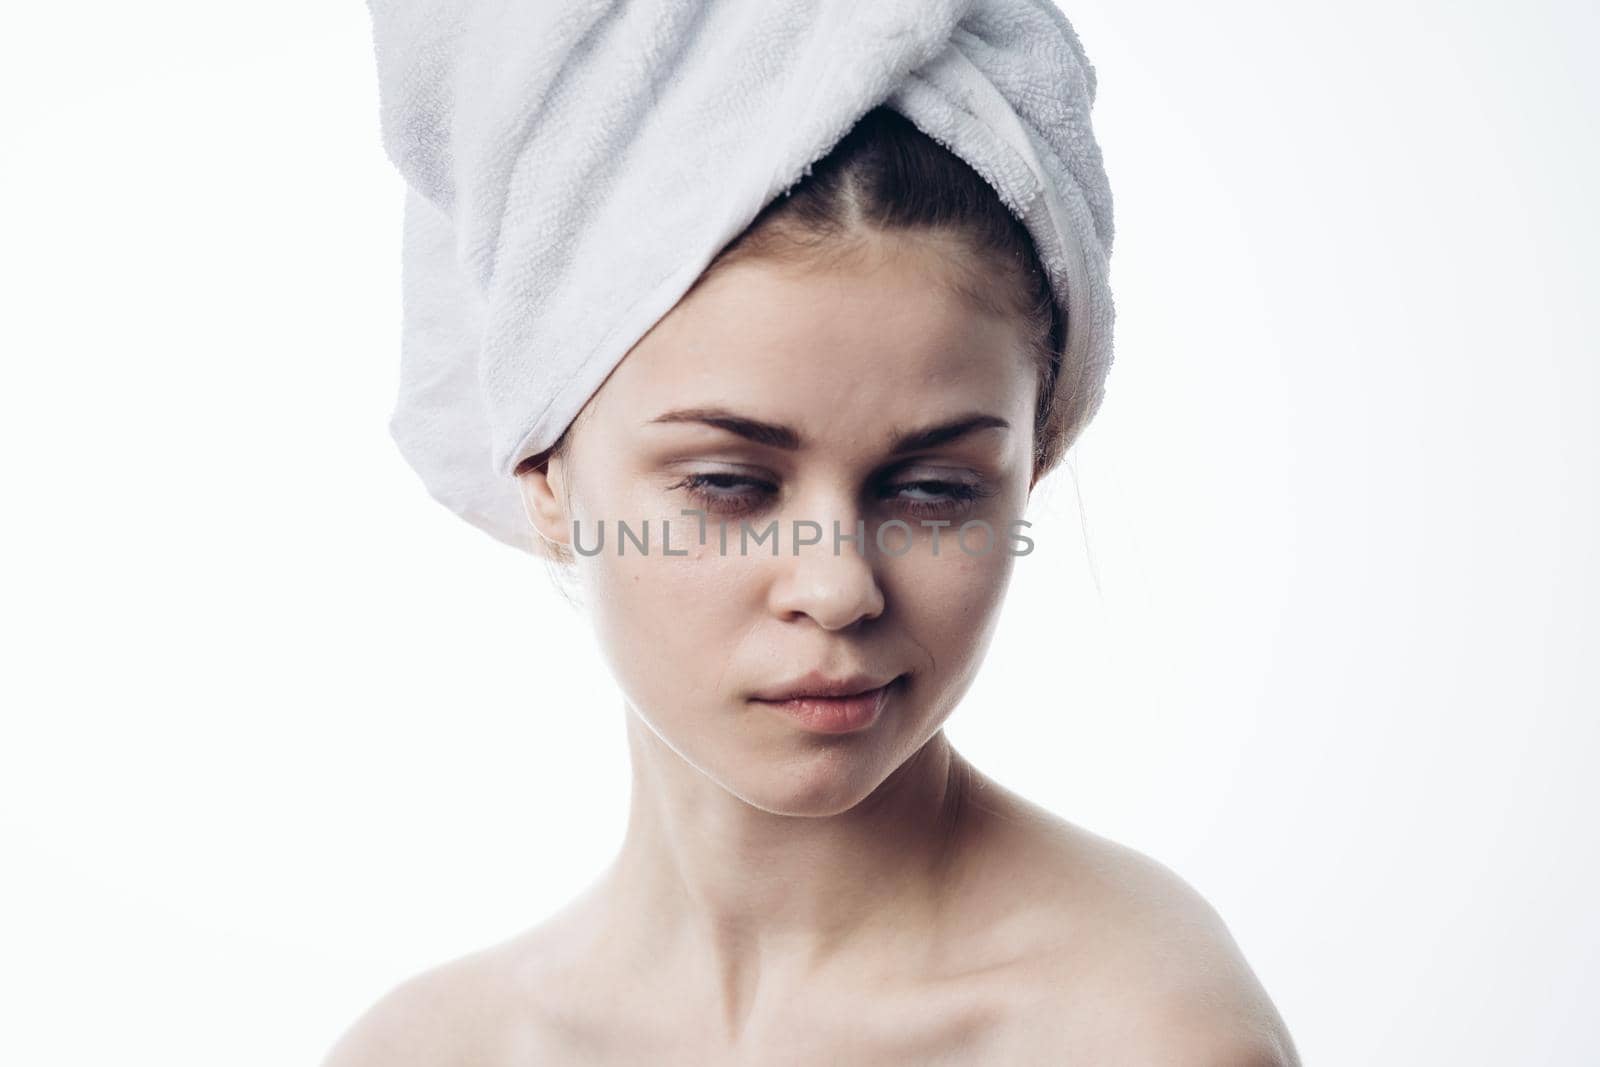 woman after shower with towel on head posing skin care by Vichizh